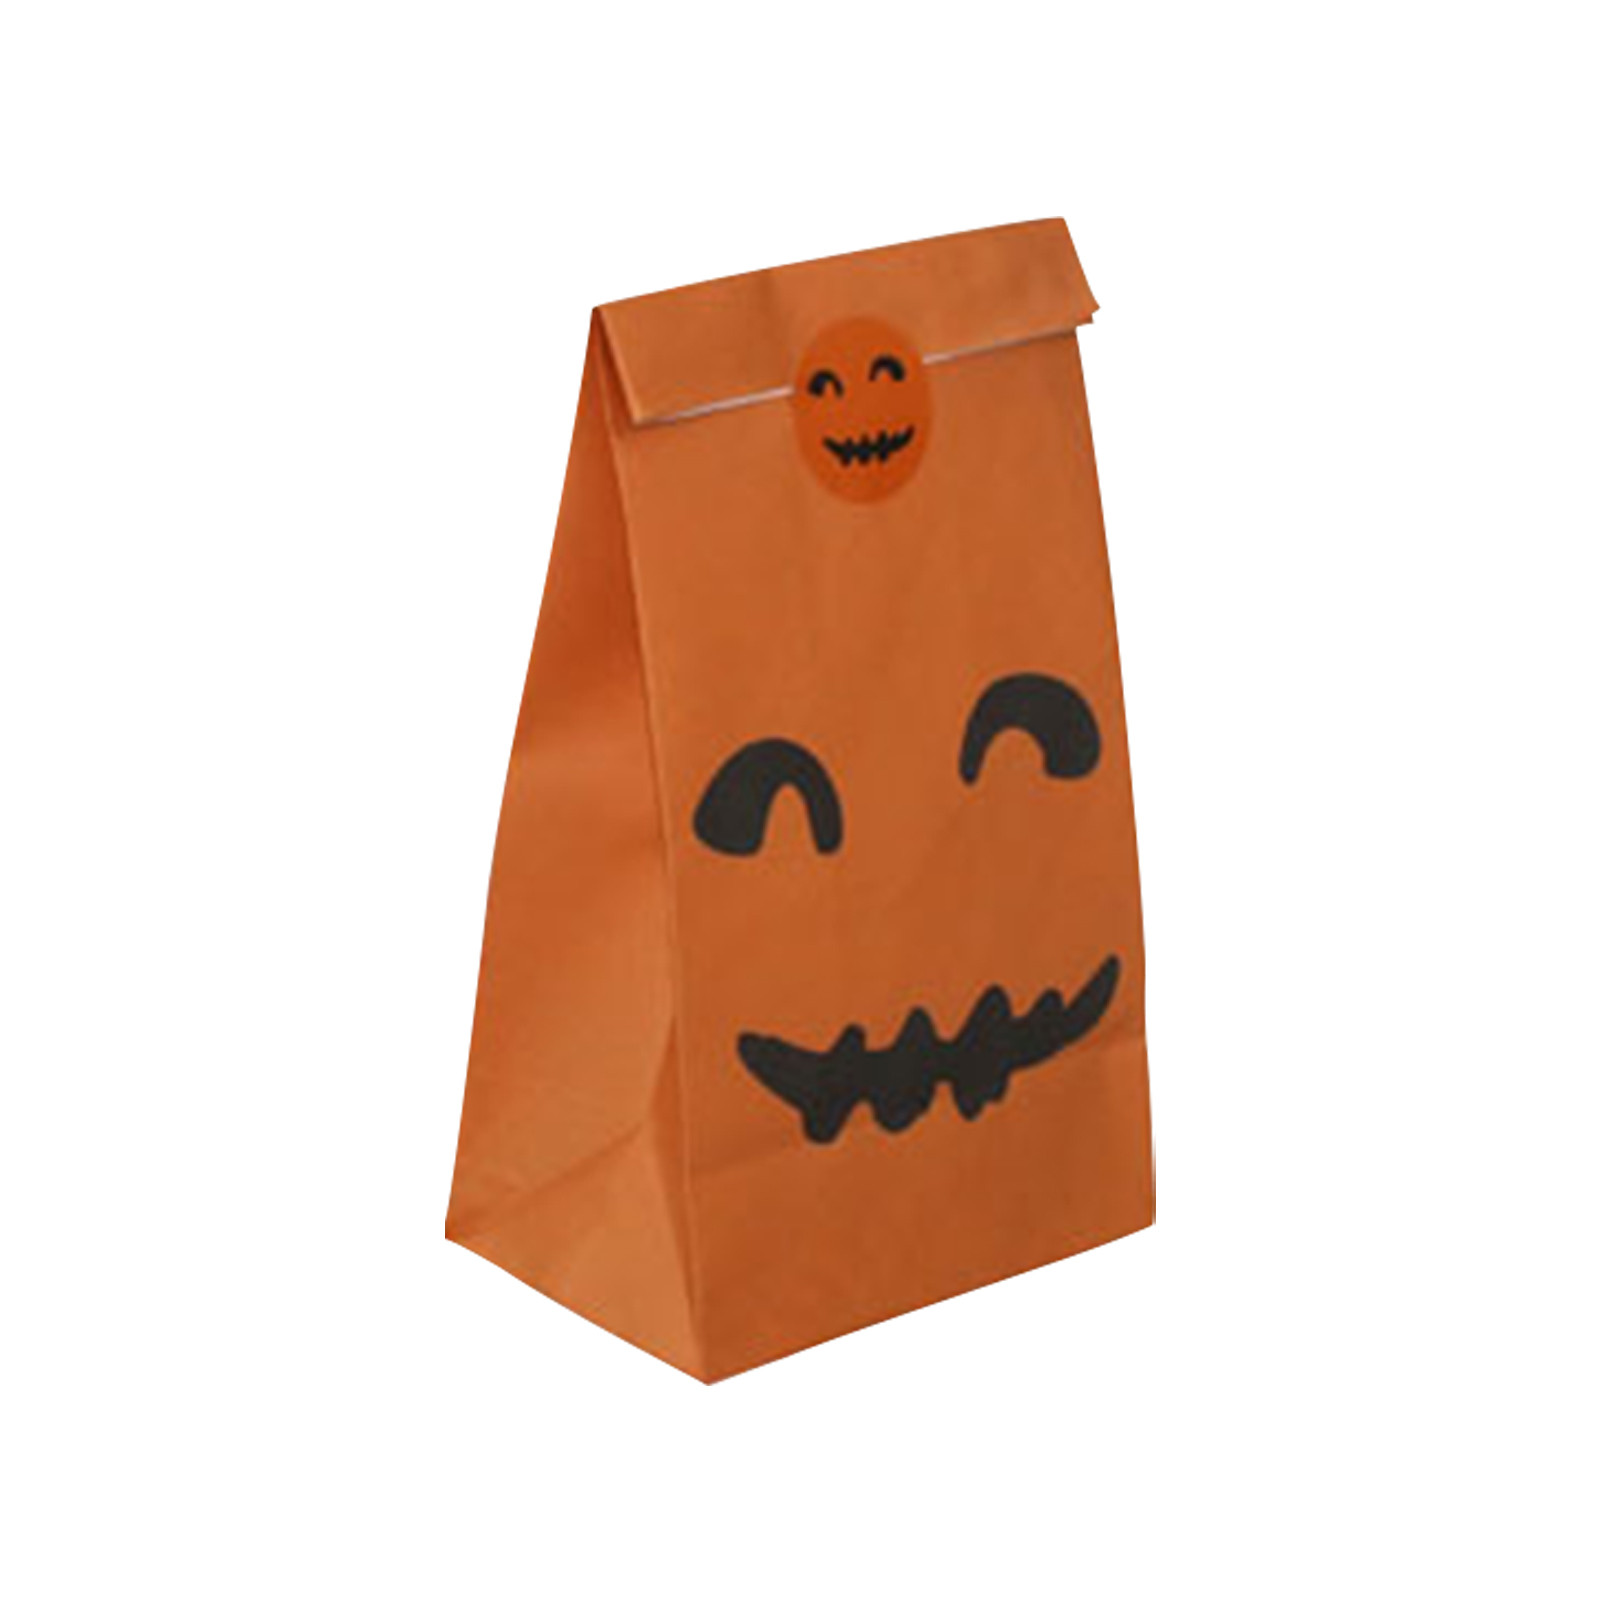 Wmkox8yii Halloween Theme Food Wrapping Paper Bag Candy Wrapping Gift Bag 